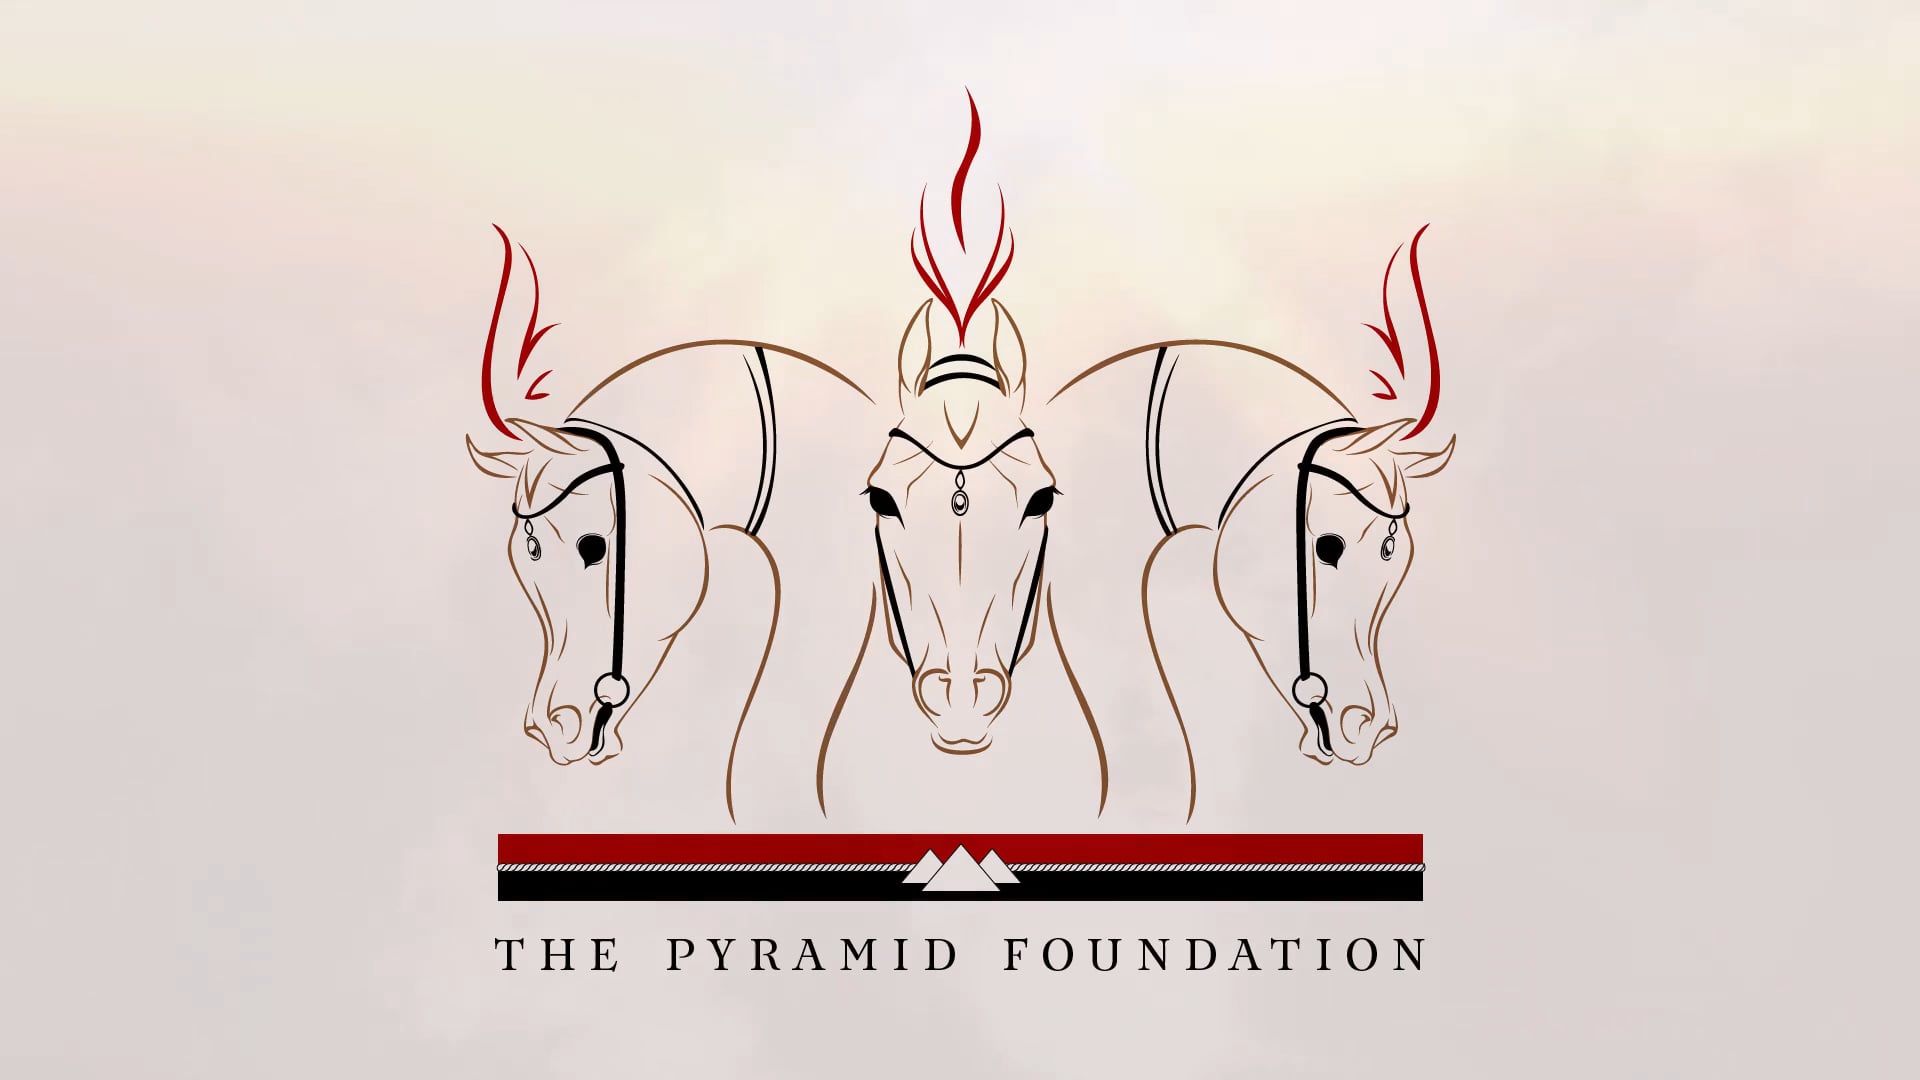 The Pyramid Foundation Legacy Project